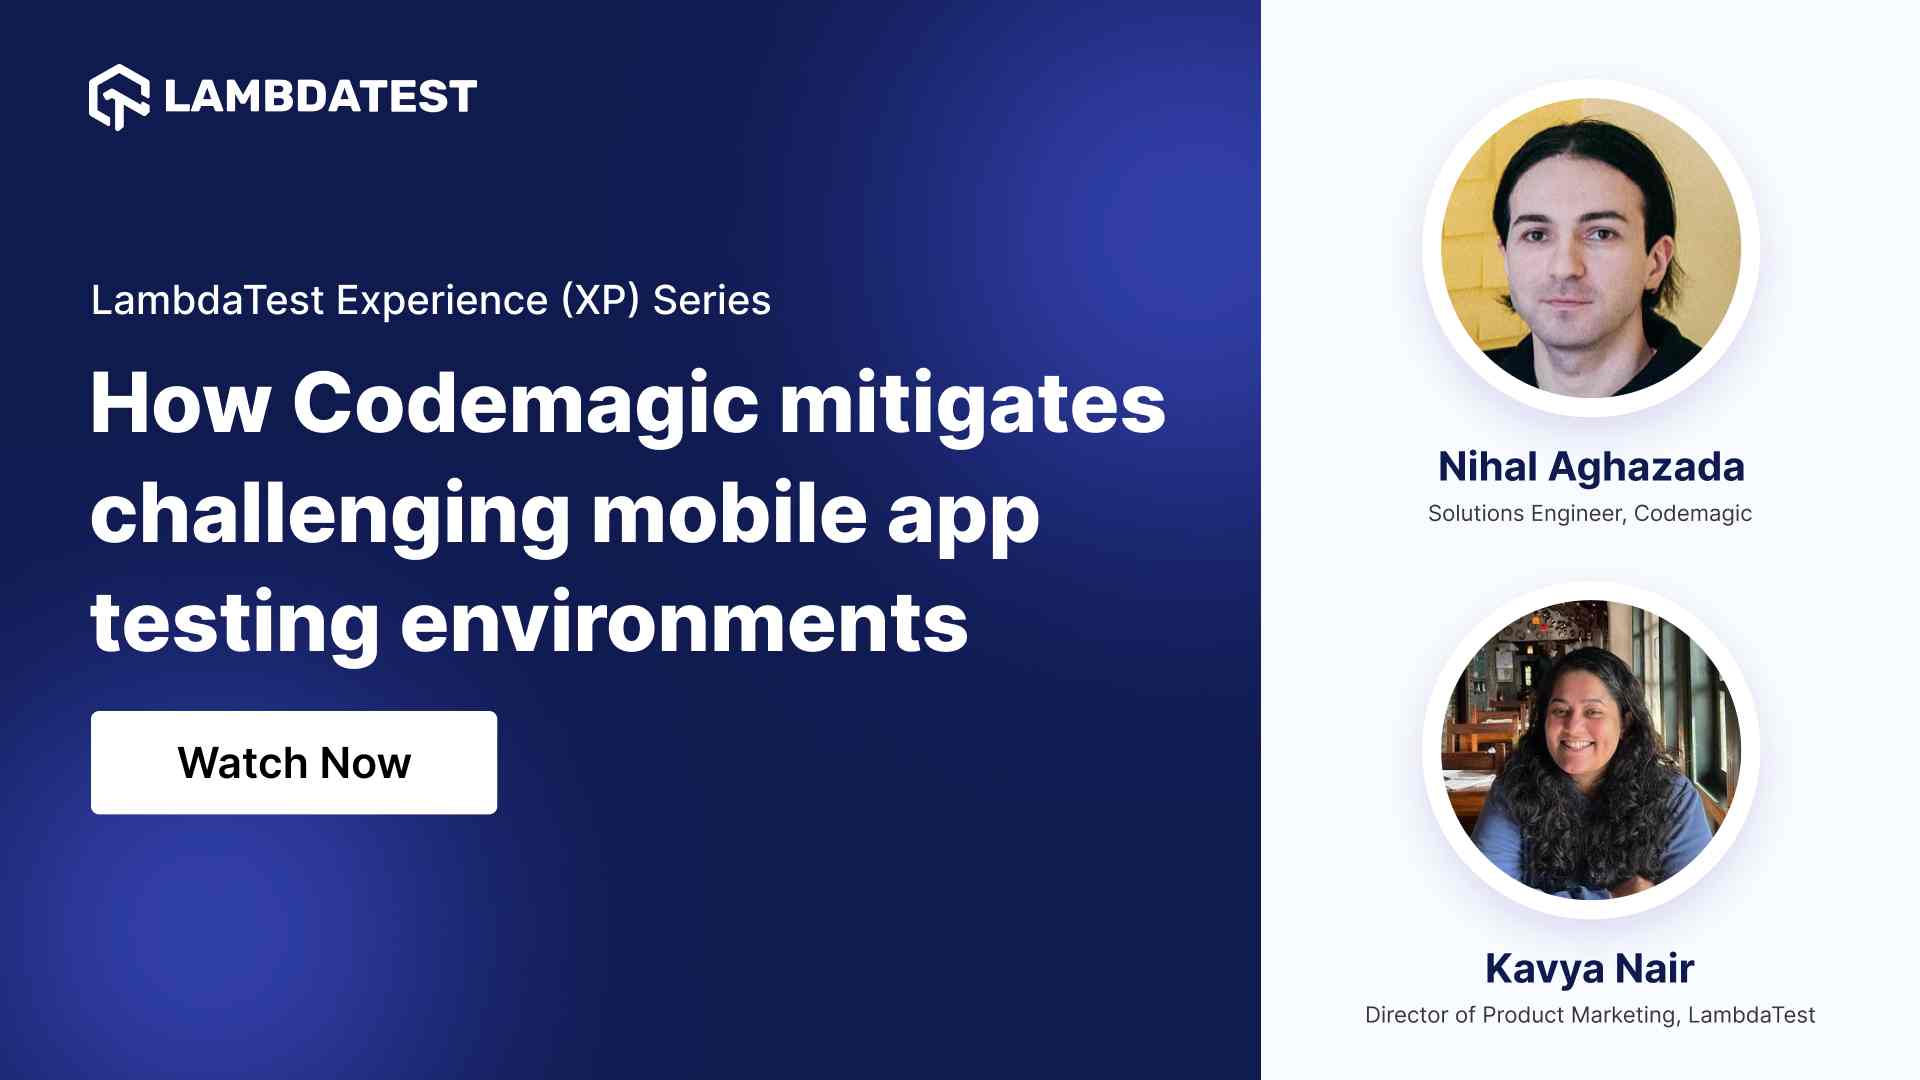 How Codemagic Mitigates Challenging Mobile App Testing Environments